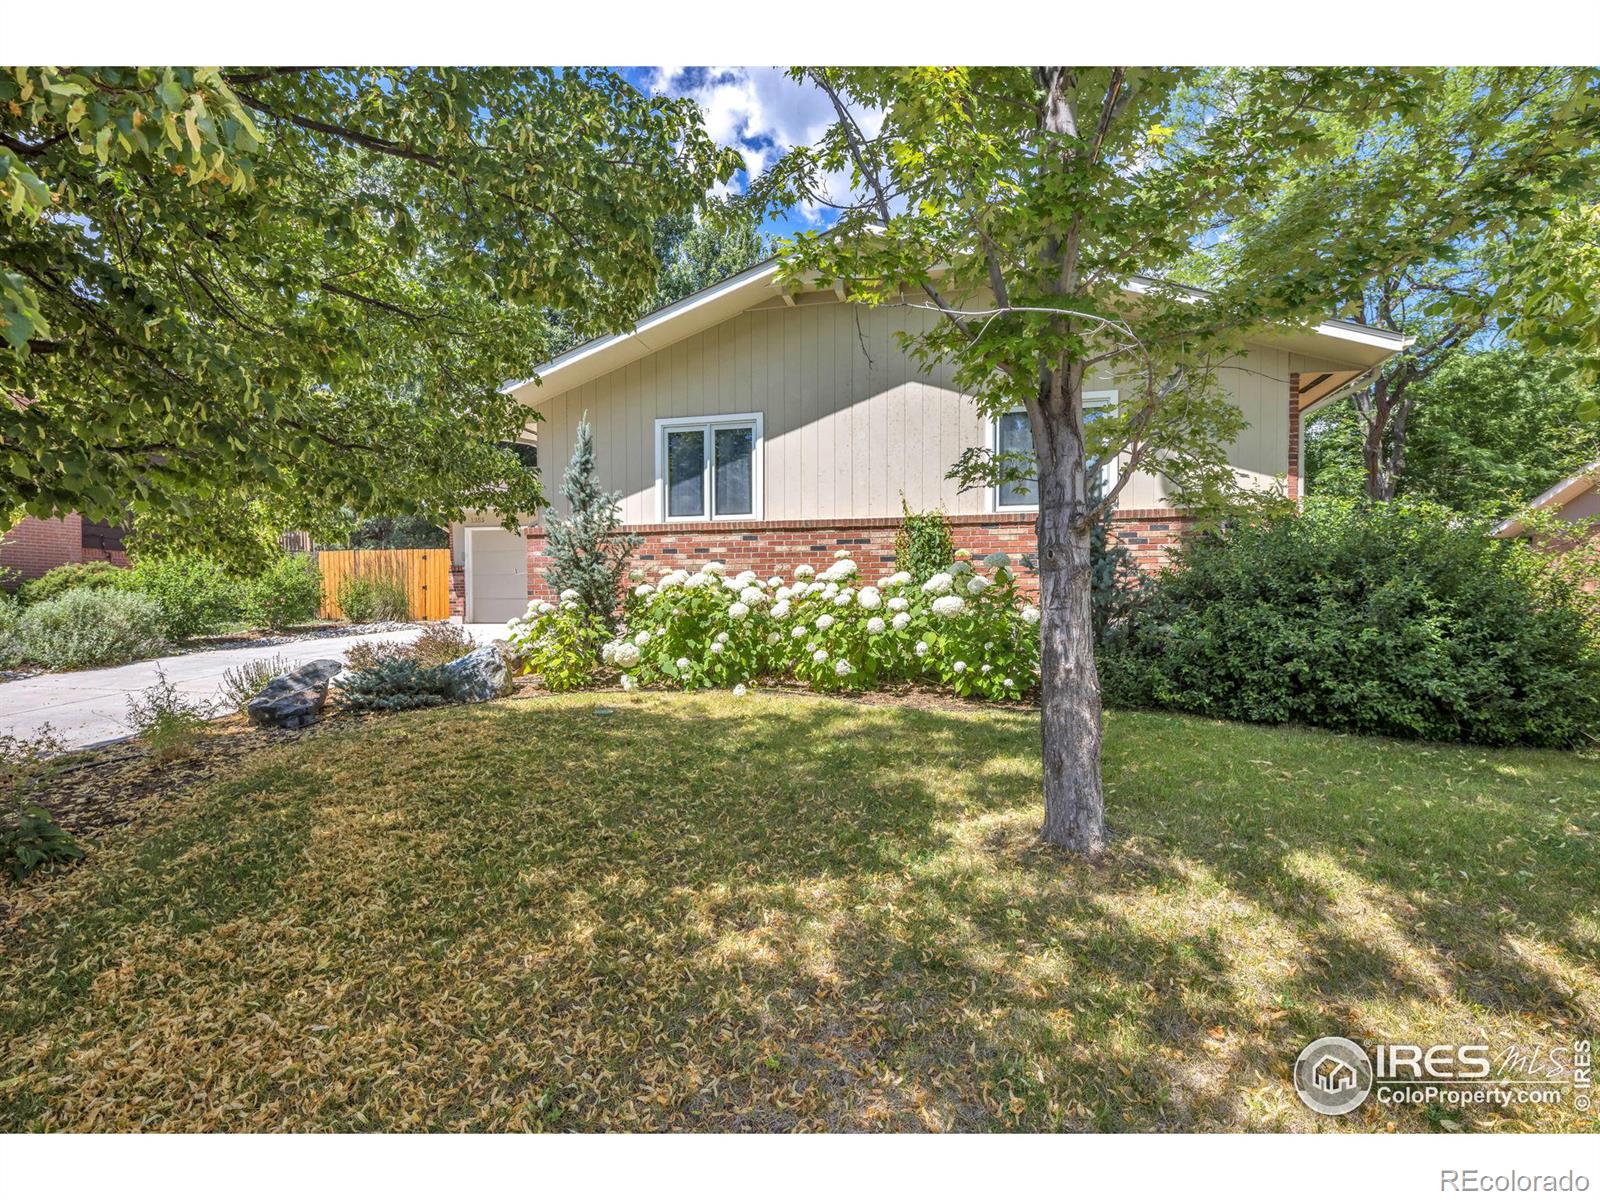 1355  ithaca drive, Boulder sold home. Closed on 2024-04-03 for $1,420,000.